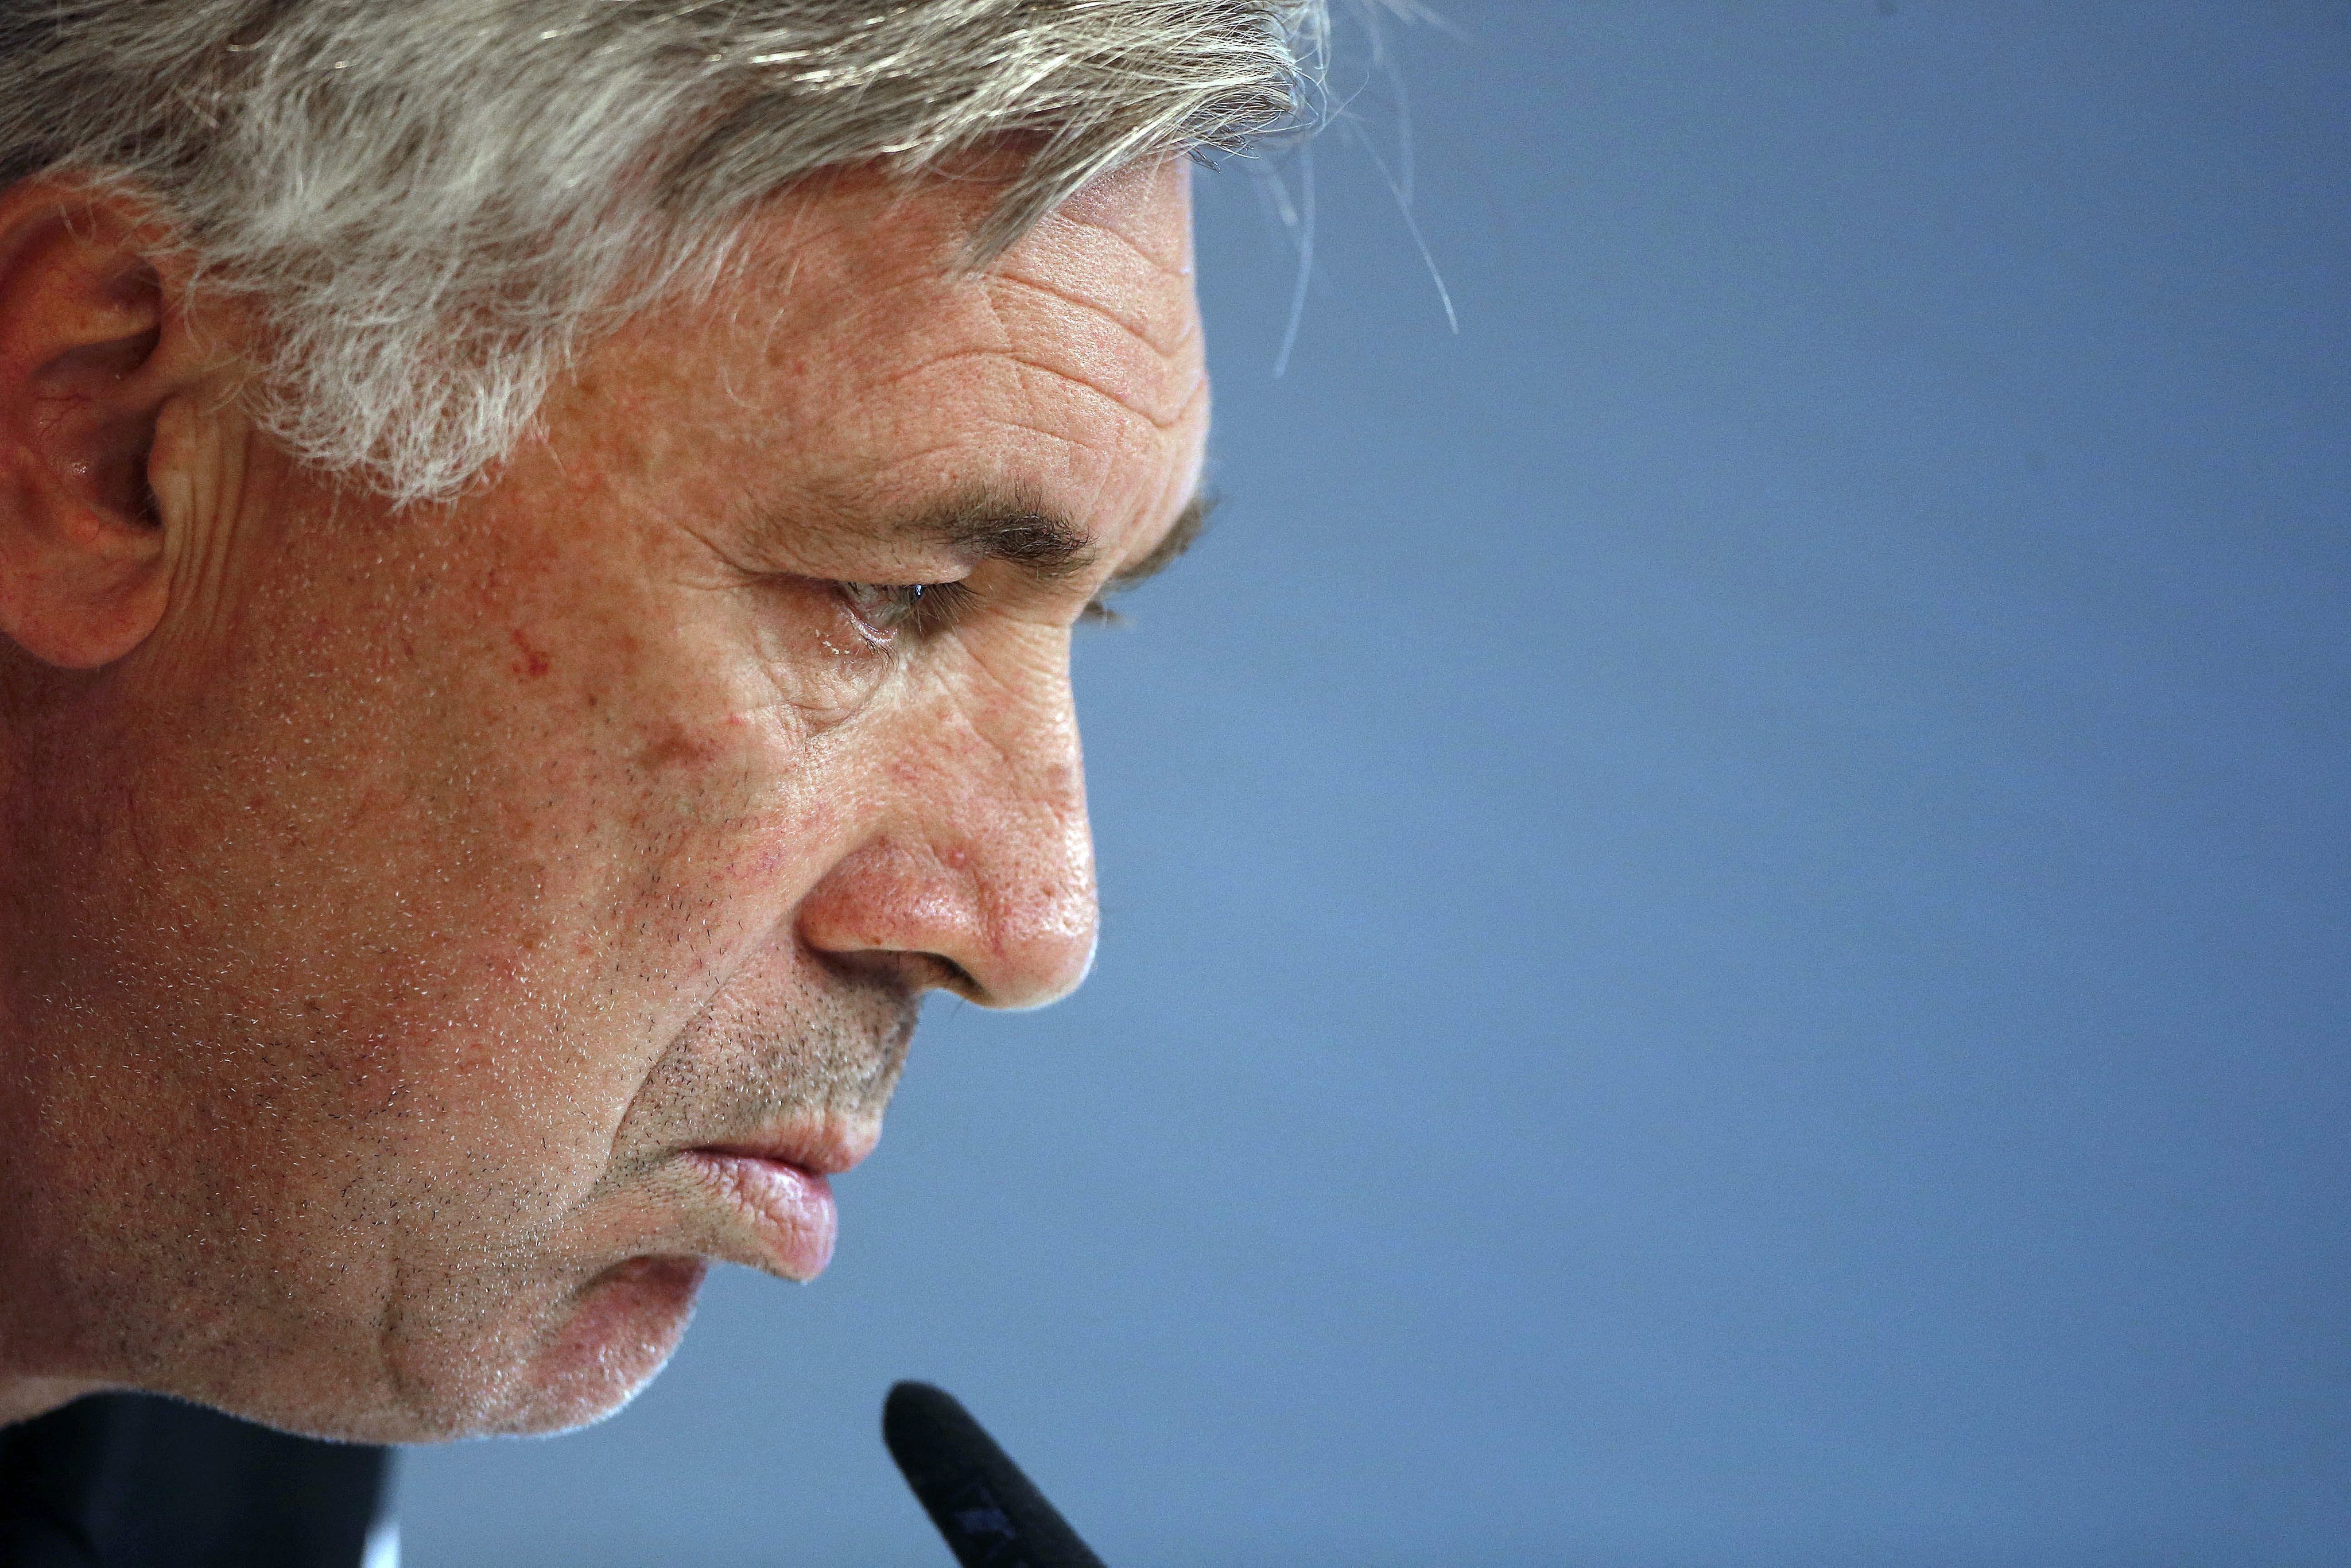 epa04738172 Head coach of Real Madrid, Italian Carlo Ancelotti, holds a press conference following a training session of the team at the Valdebebas sports complex in Madrid, Spain, 08 May 2015. Real Madrid will play a Spanish Primera Division League soccer match against Valencia CF on 09 May 2015.  EPA/Javier Lizon